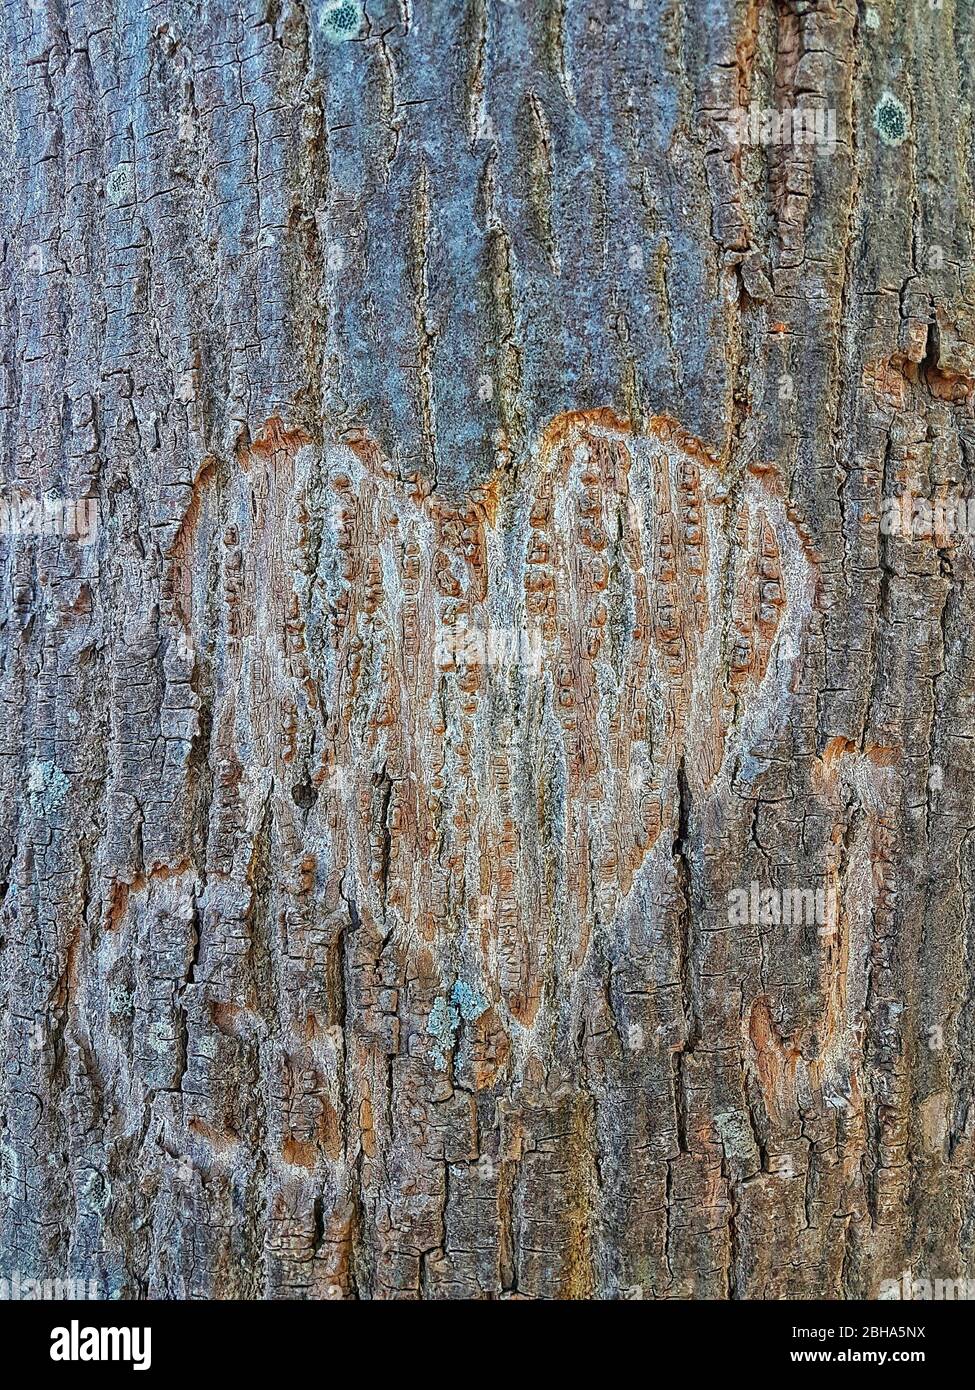 Heart and initials carved in a tree trunk Stock Photo